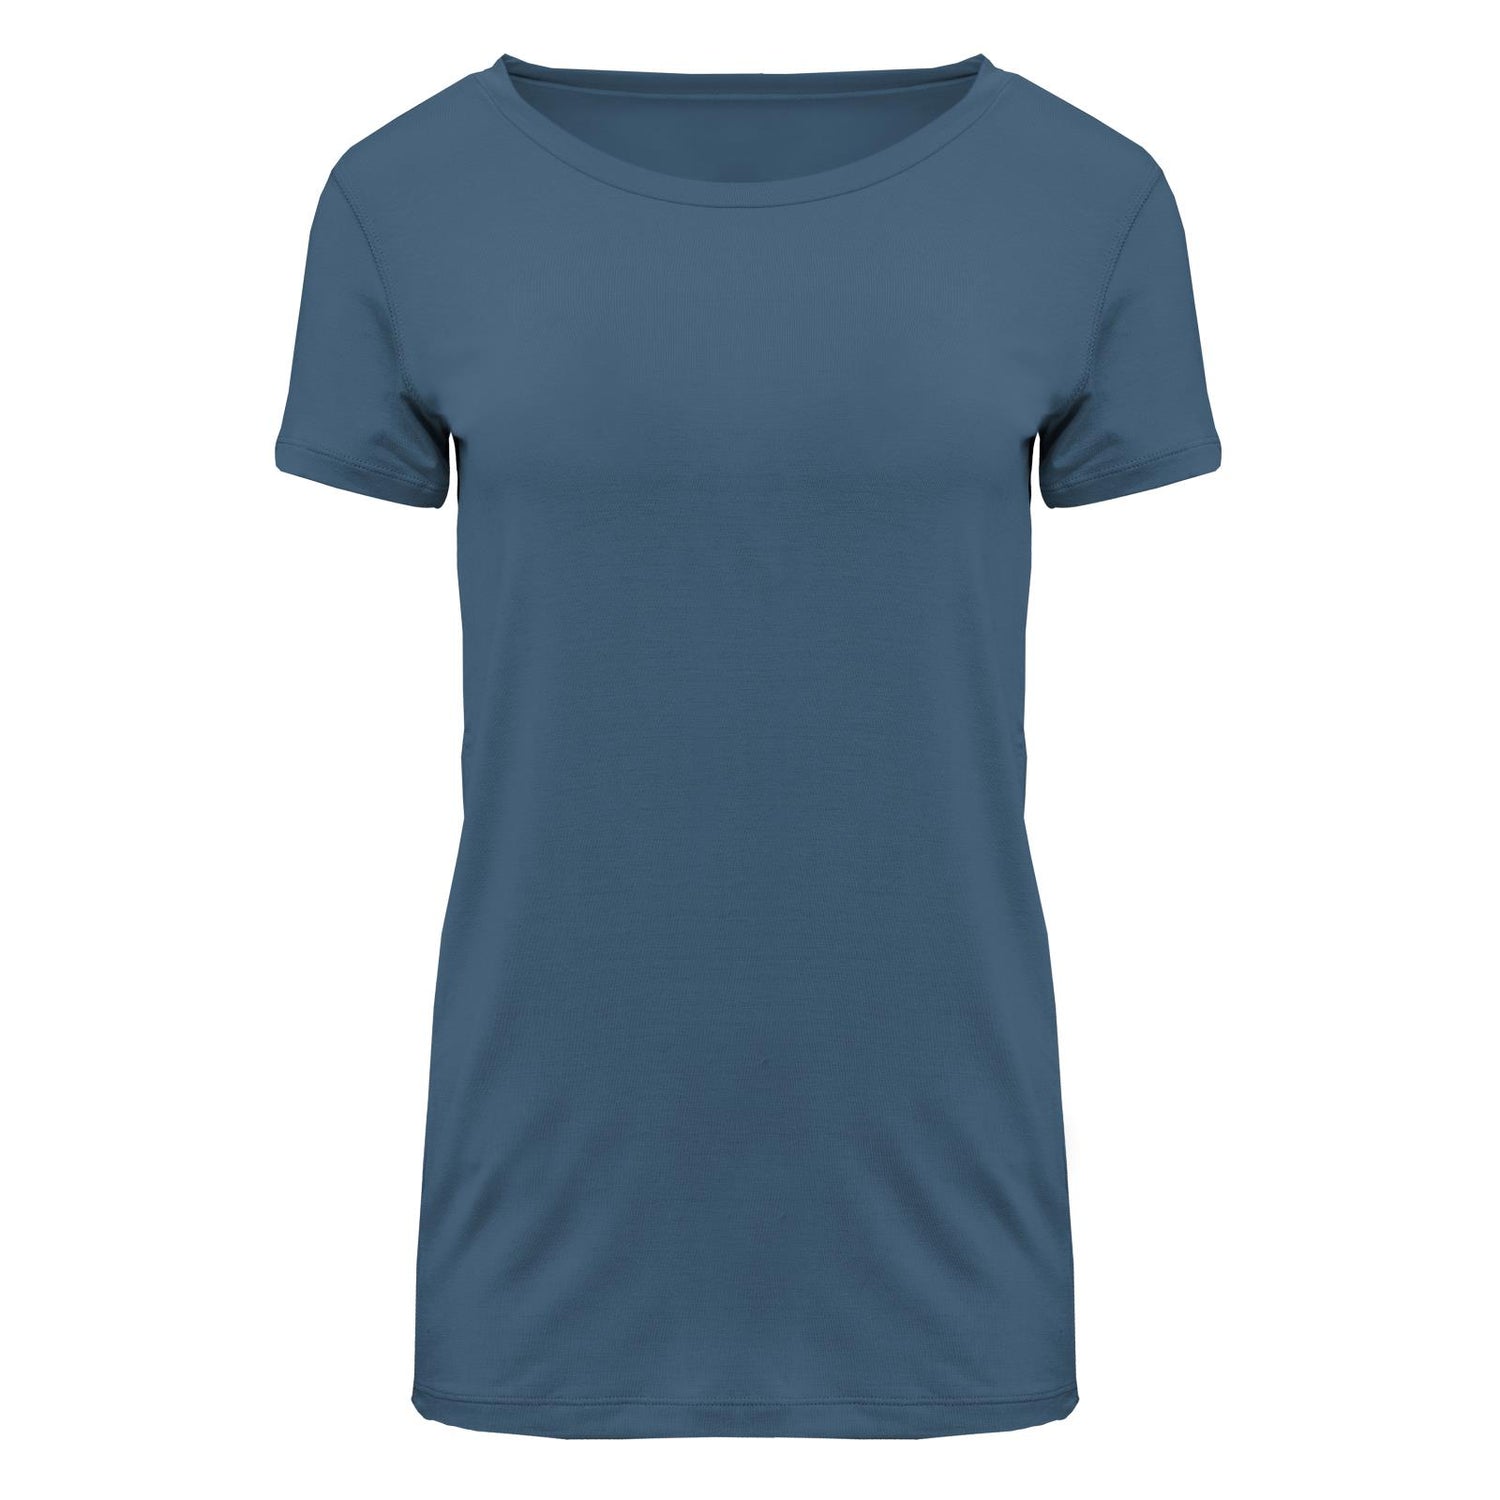 Women's Solid Short Sleeve Relaxed Tee in Twilight